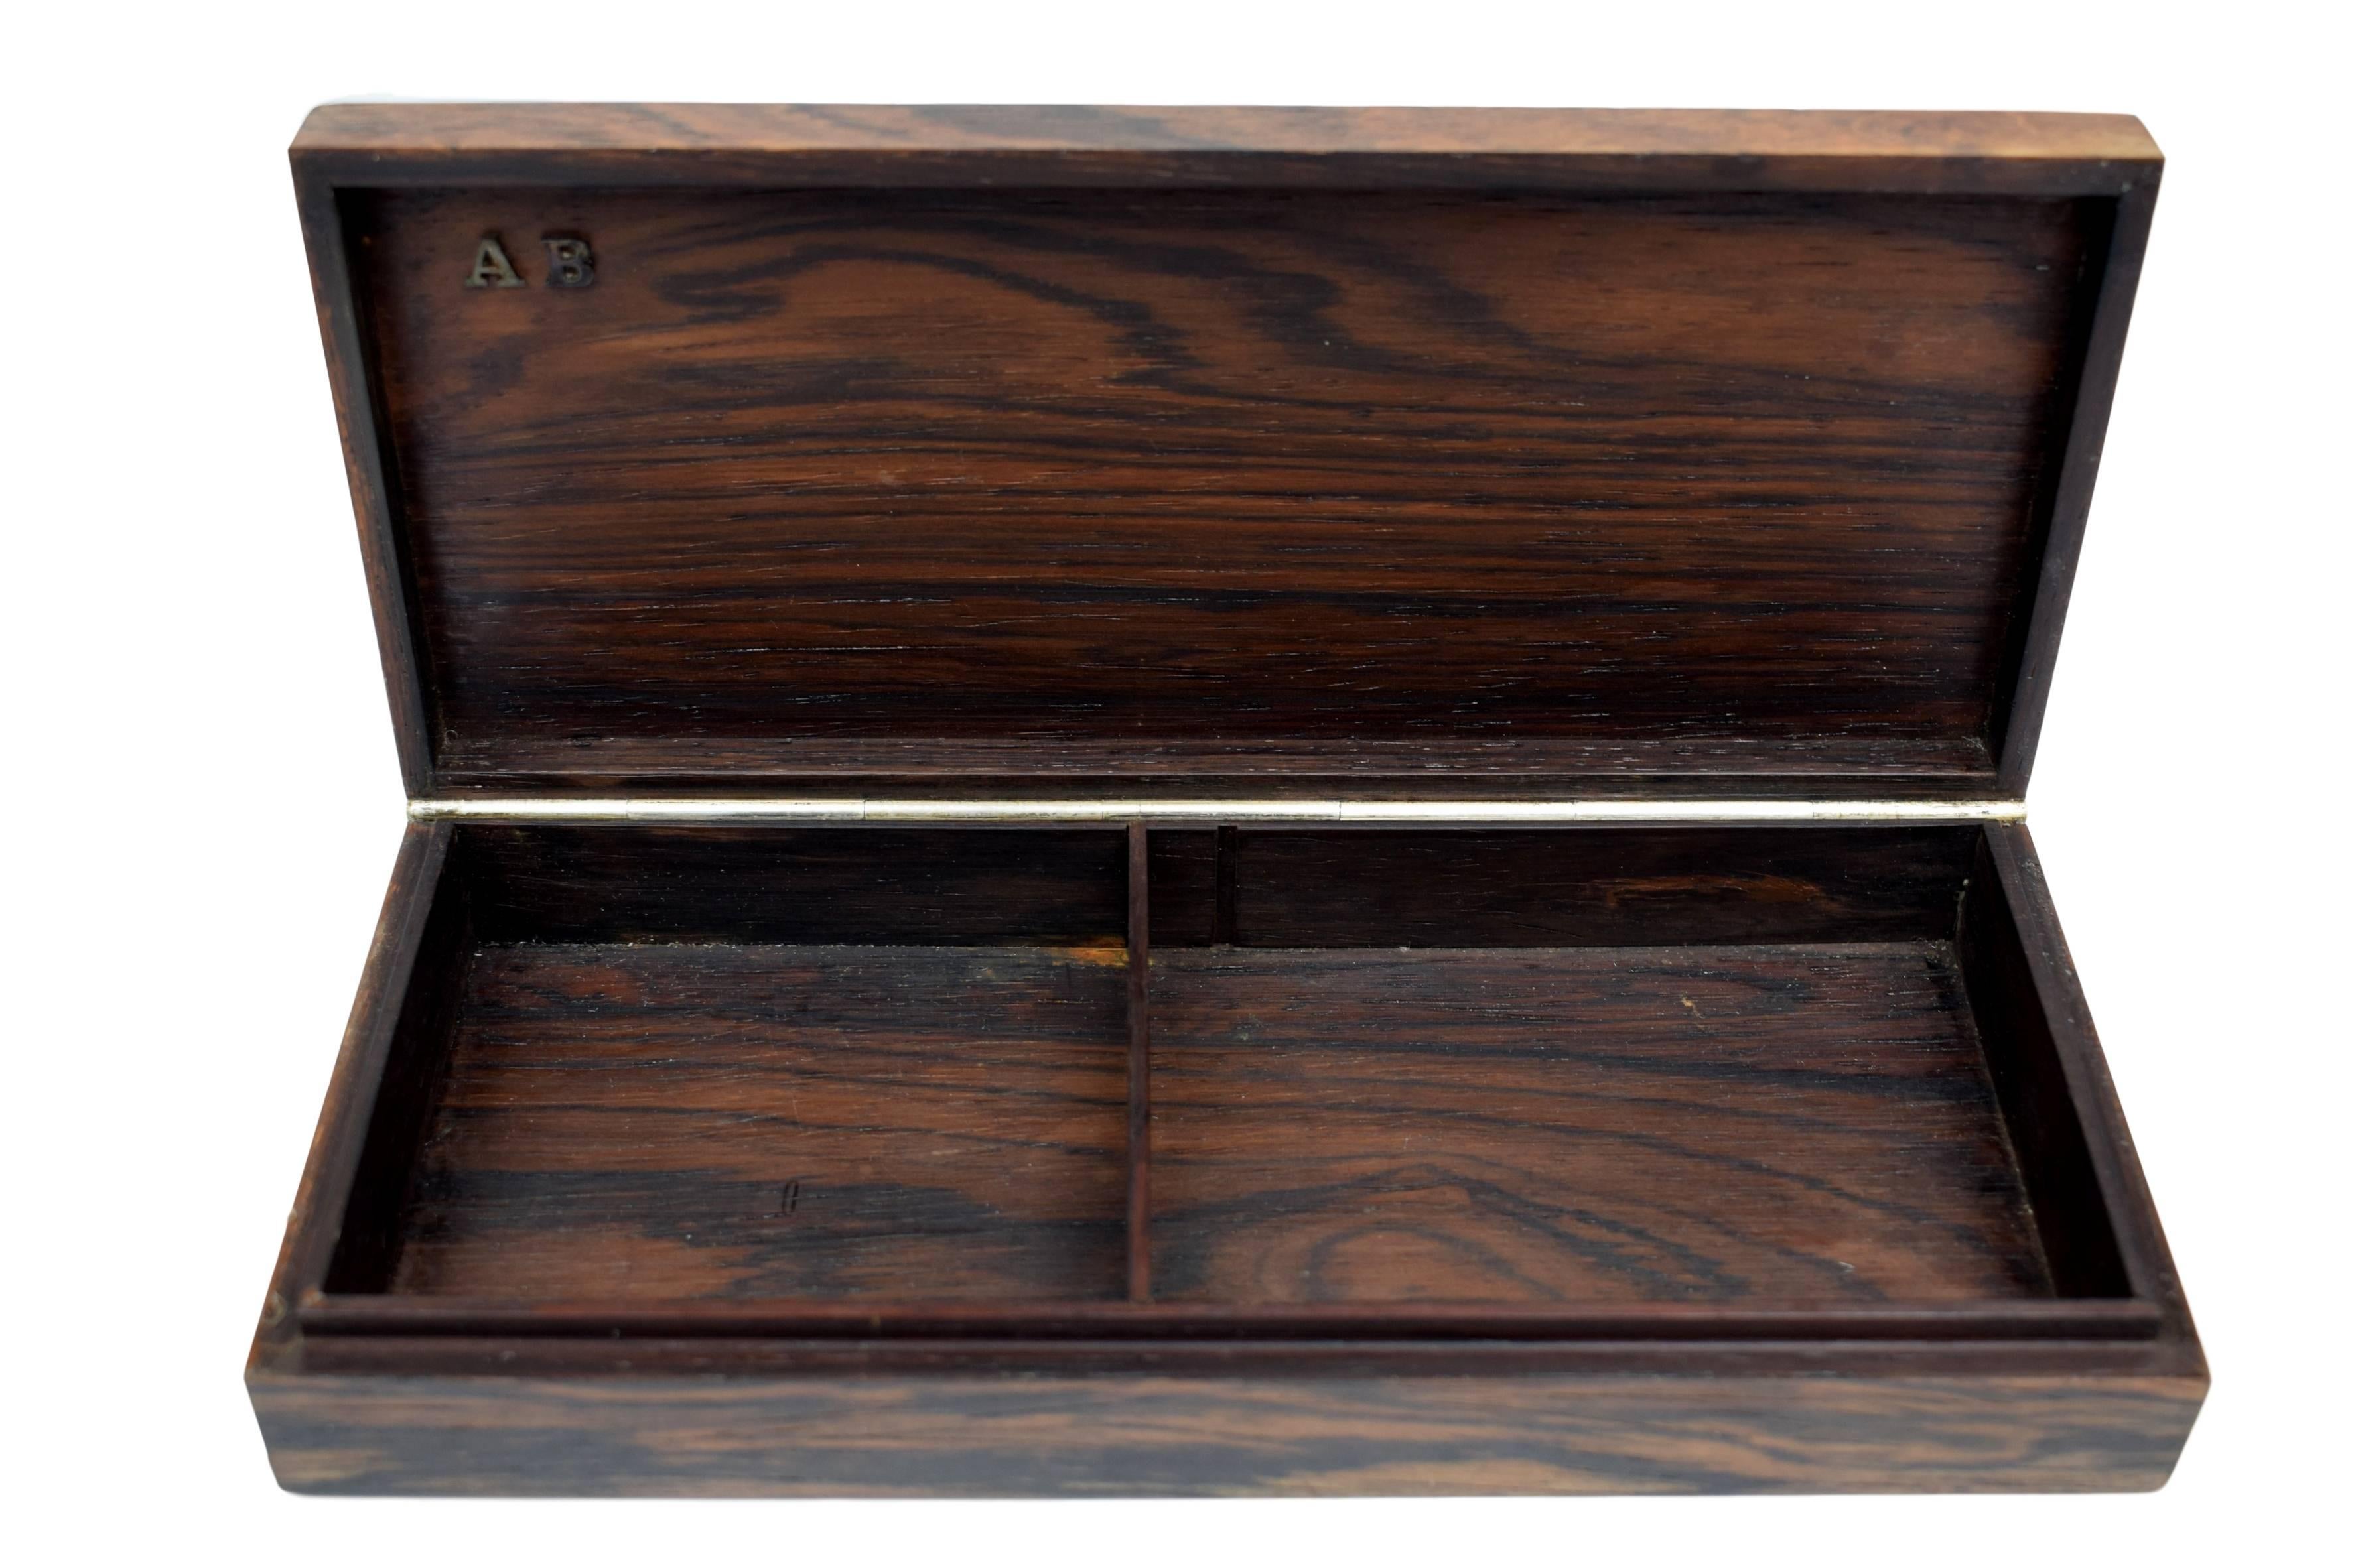 Danish Midcentury Rosewood Box with Sterling 925 Silver Inlays by Hans Hansen For Sale 2